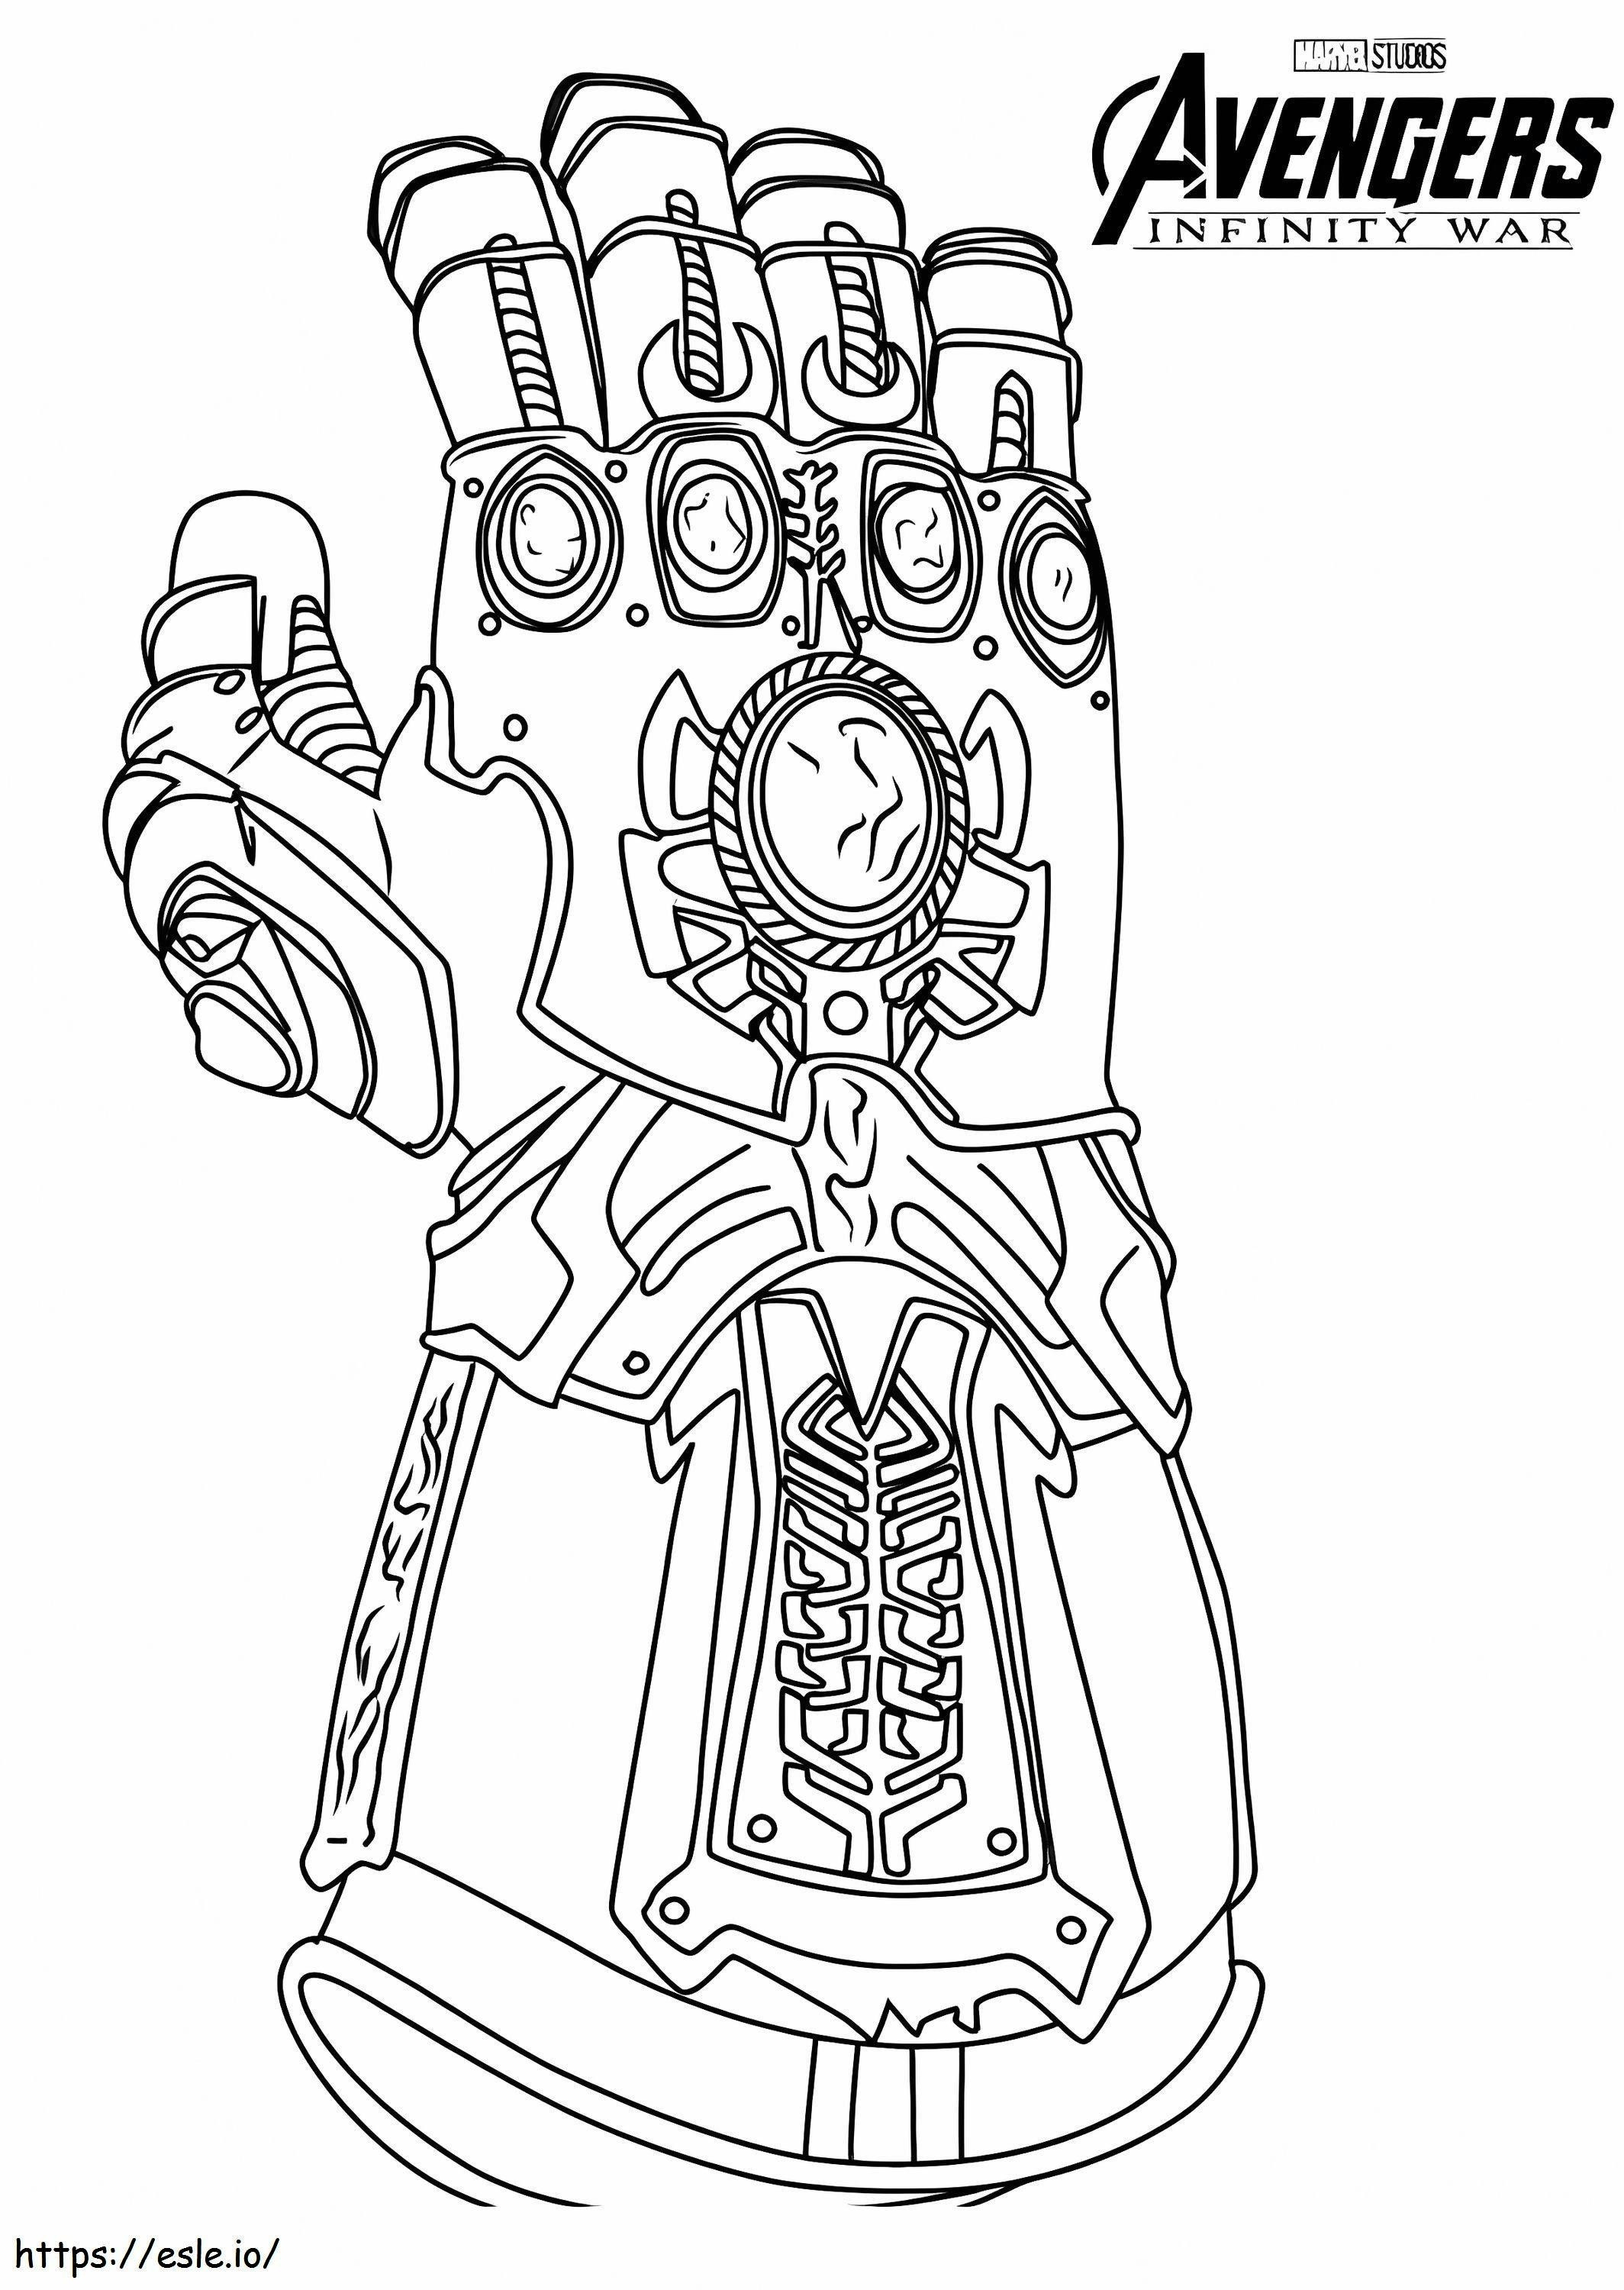 Great Infinity Gauntlet coloring page